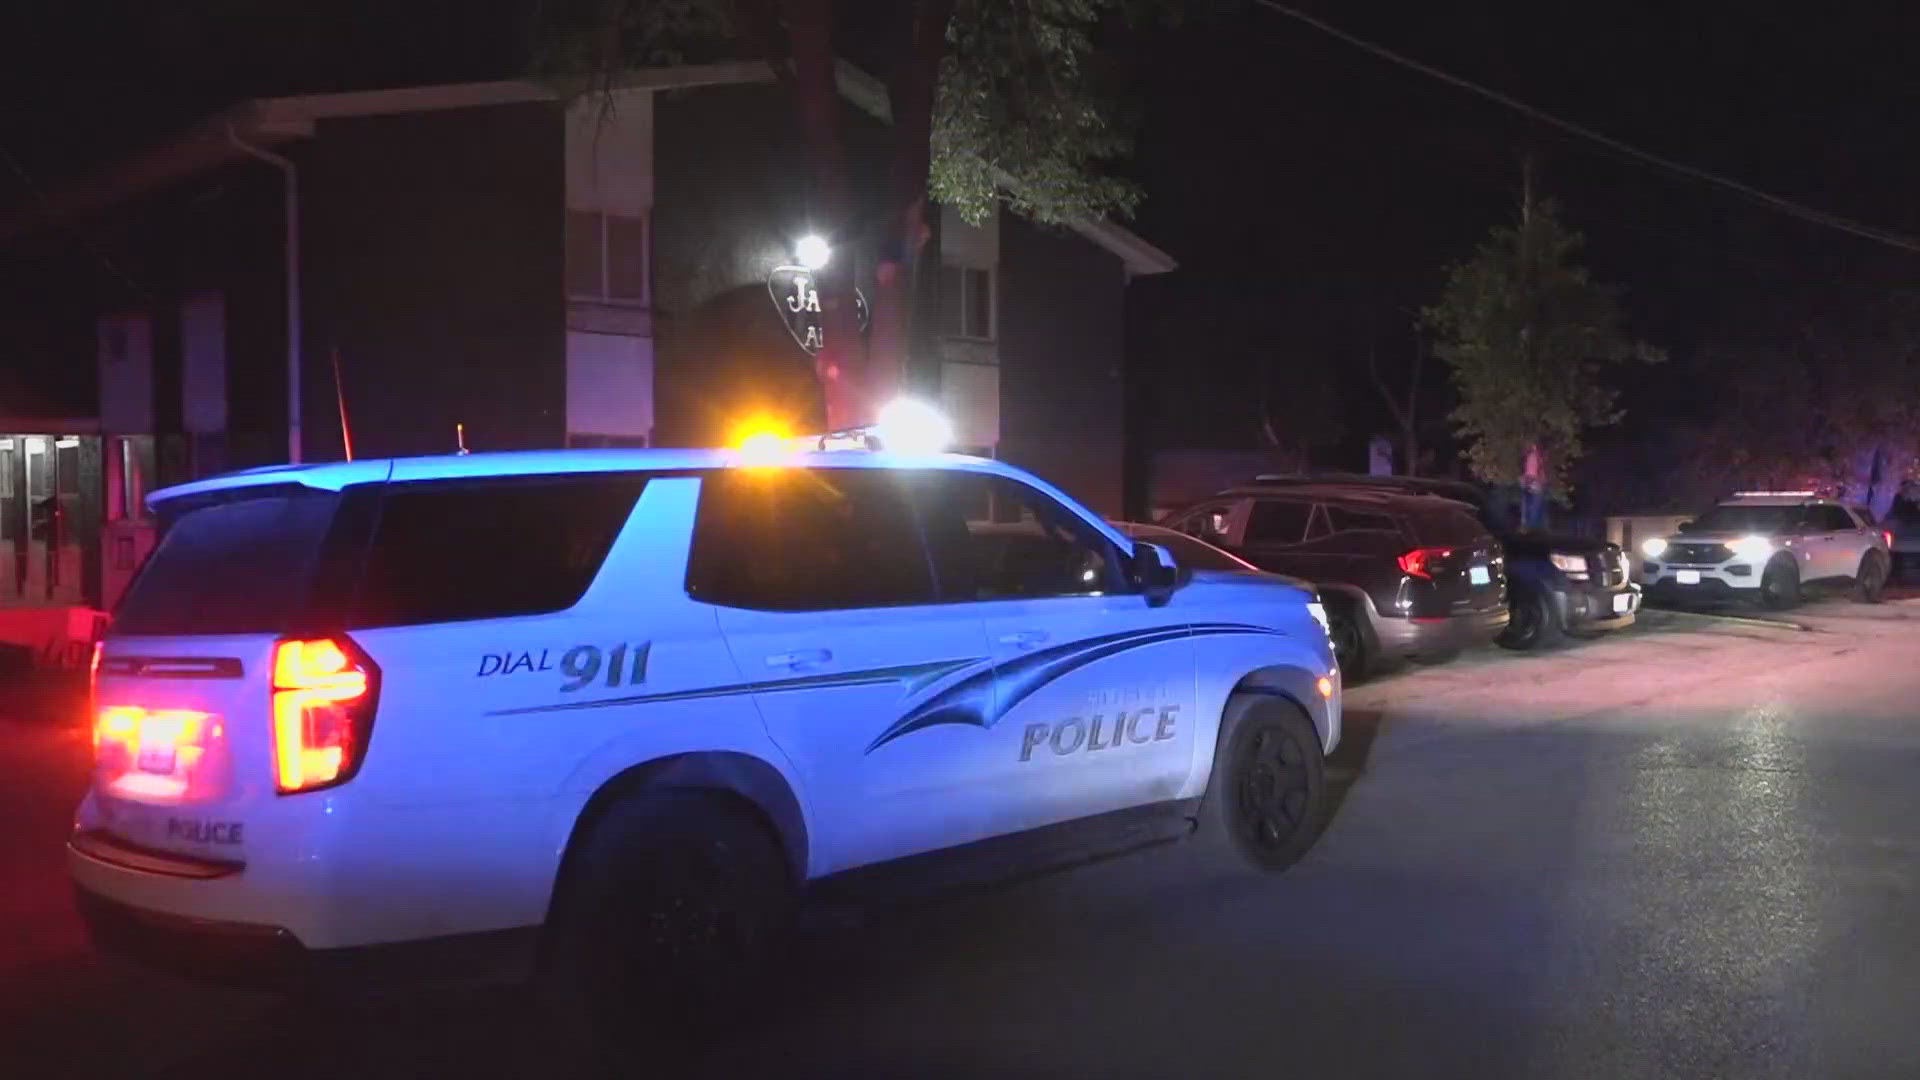 On Mother's Day, one teenage boy died and three others were injured in a shooting Sunday night outside an apartment complex in north St. Louis County.